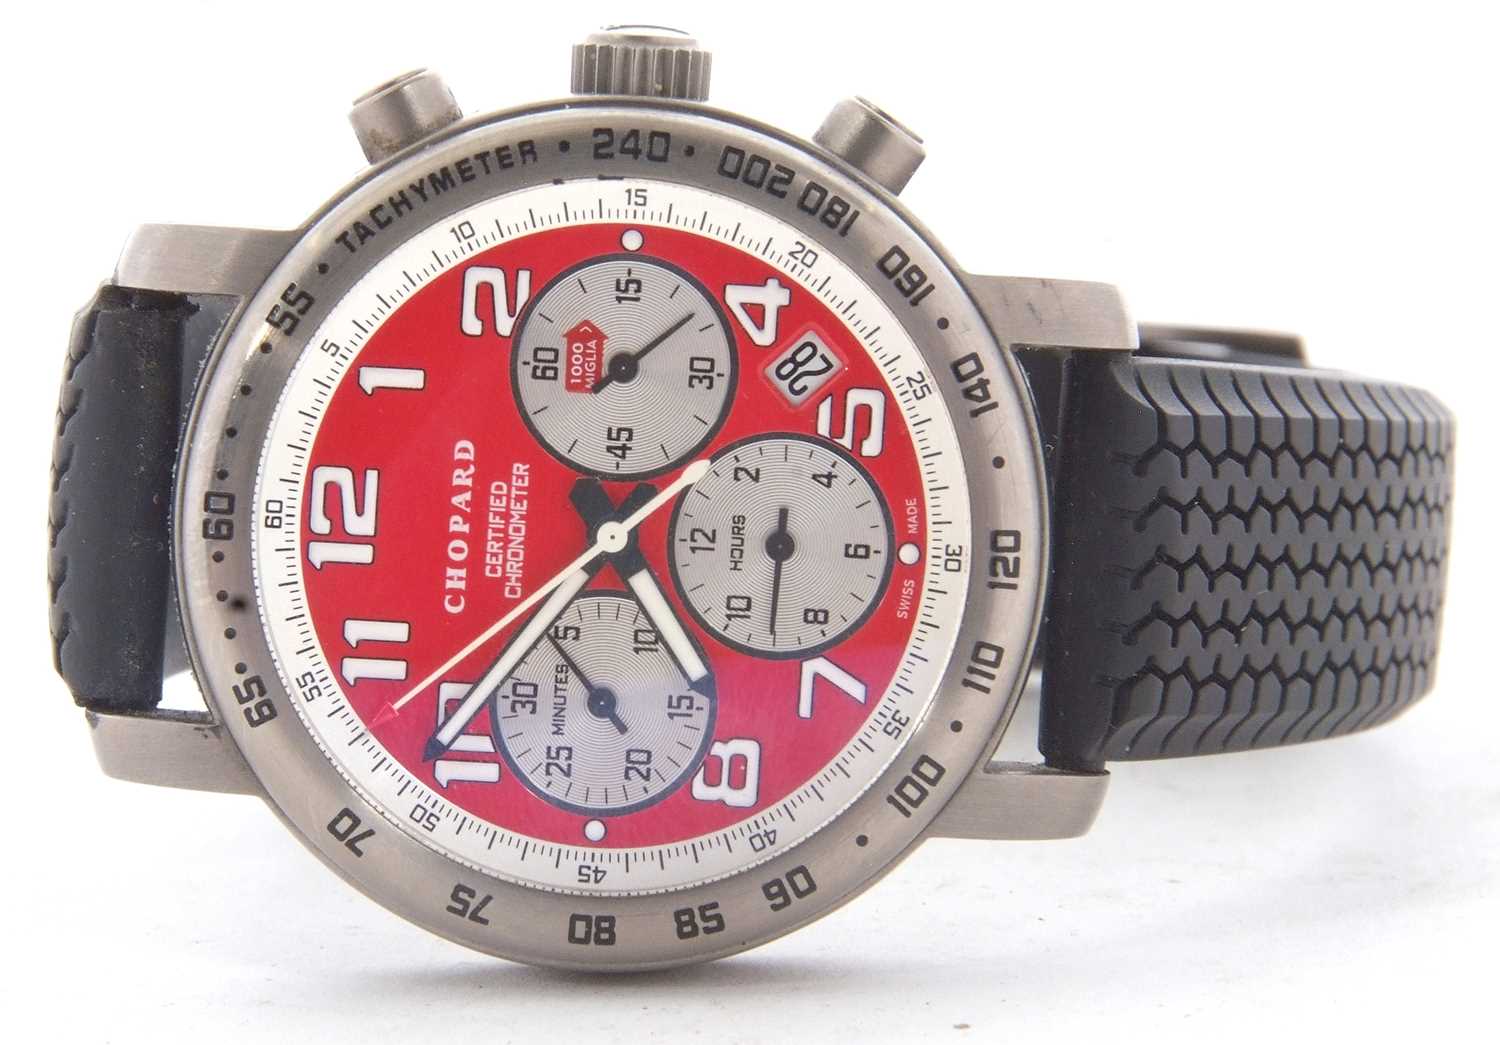 A Chopard Mille Miglia 8195 chronograph Rosso Corsa gents wristwatch, the watch features a - Image 2 of 8